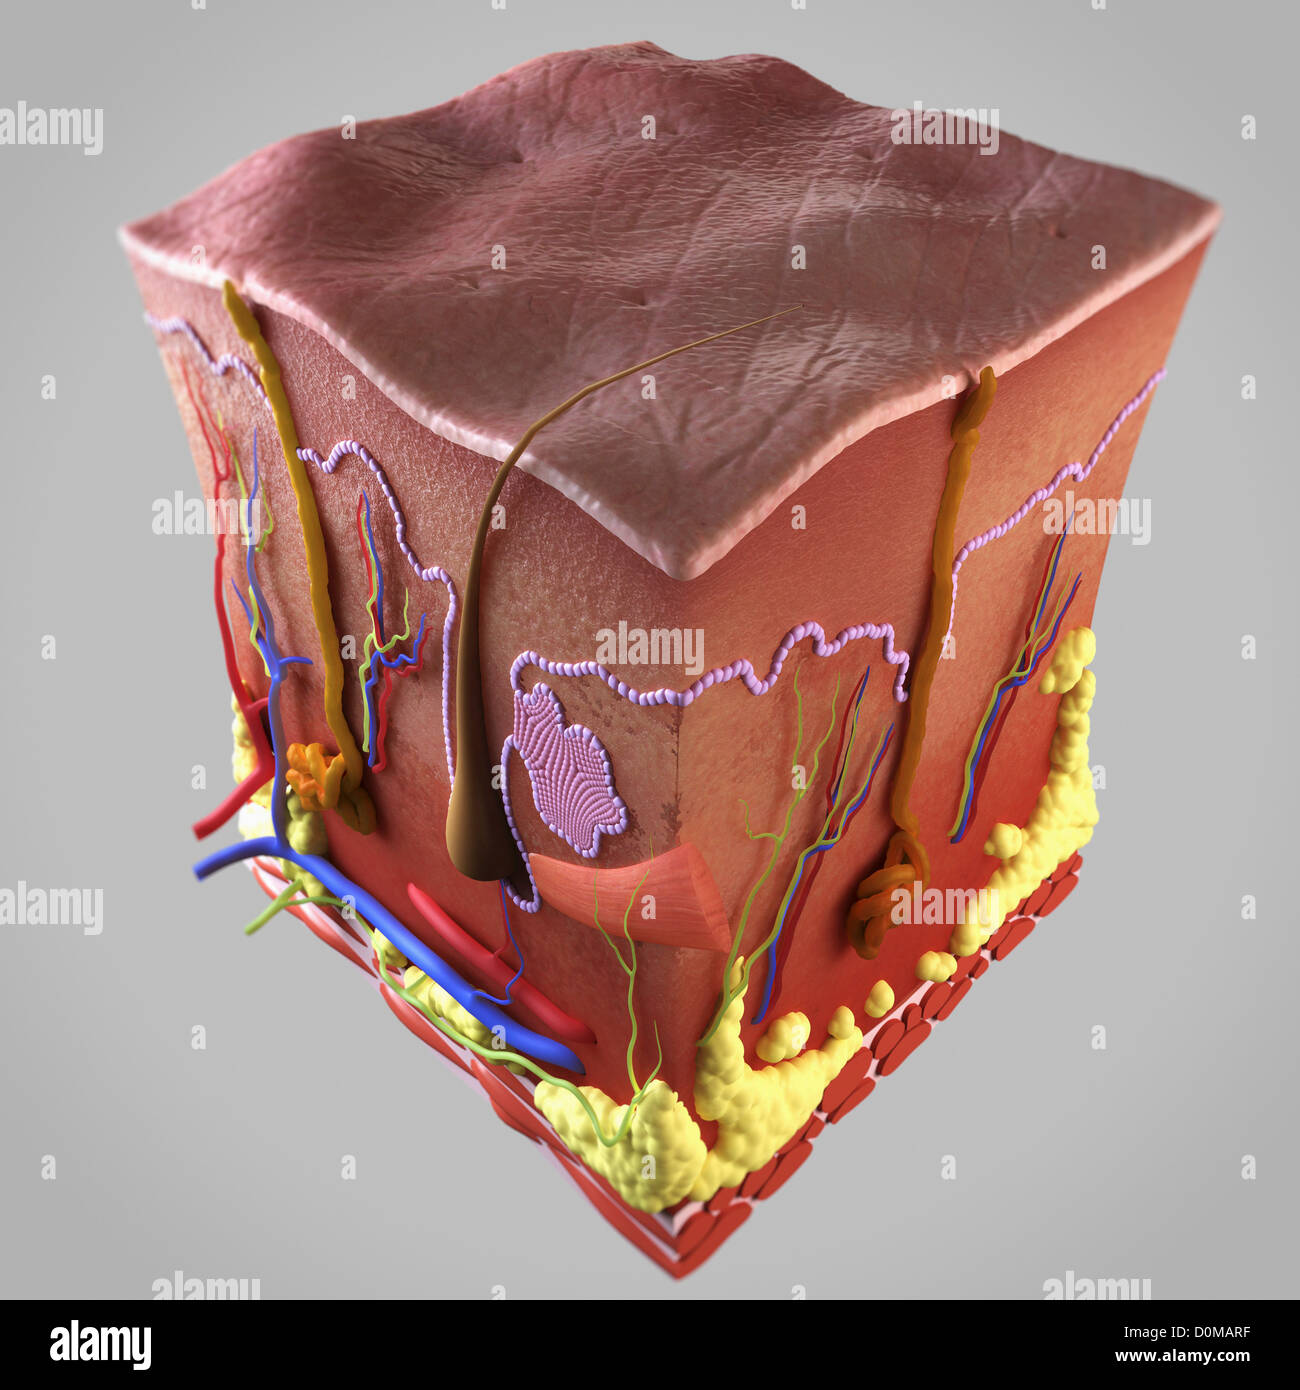 Cross section of skin showing the epidermis, dermis and subcutis layers. Stock Photo